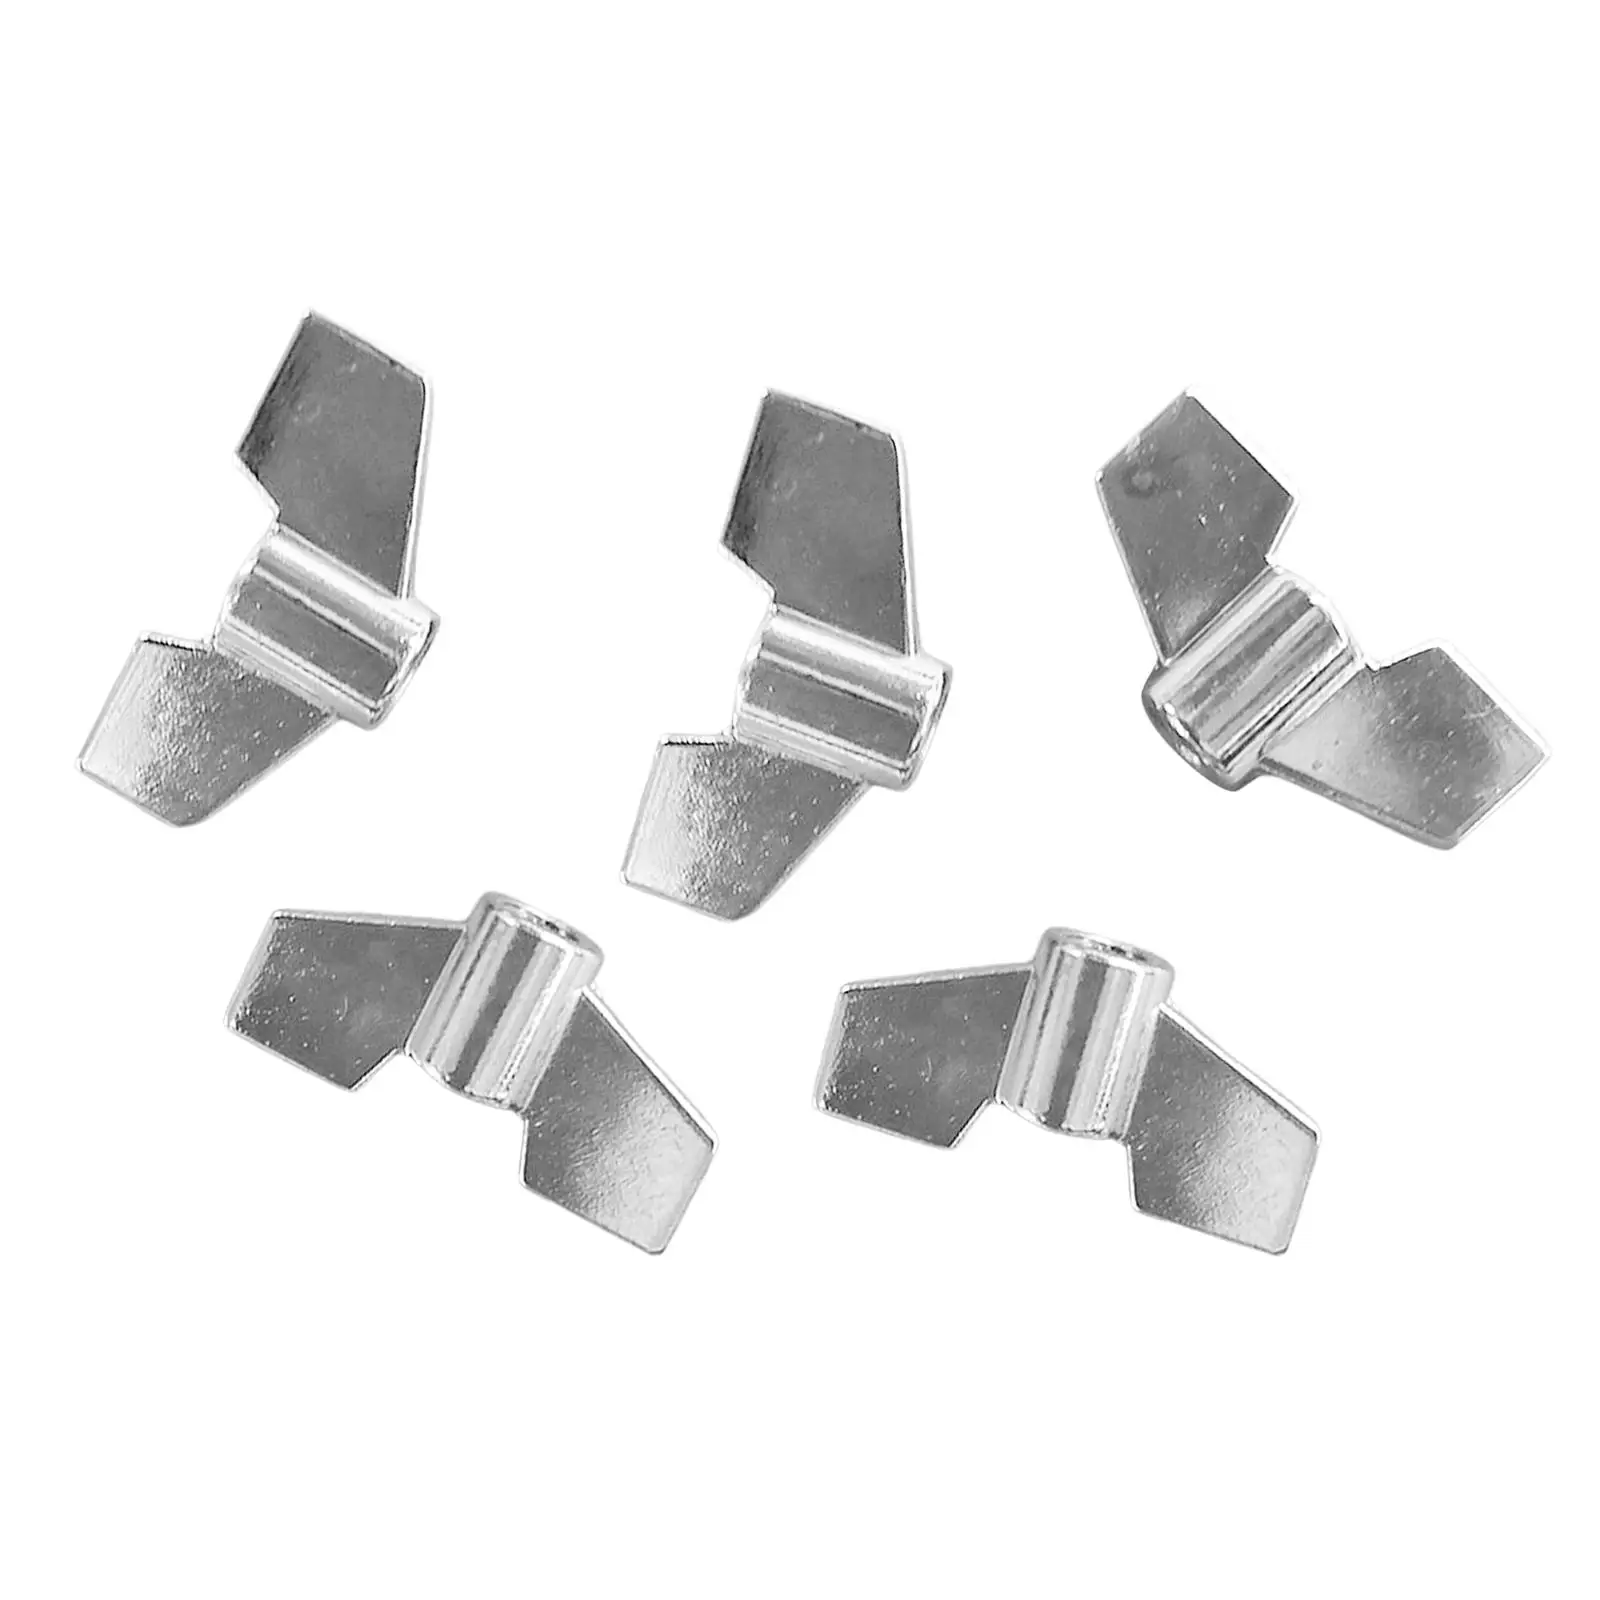 5 Pieces Cymbal Wing Nuts Cymbal Replacement Accessories Drum Accessory Stage Performance Drum Wing Nuts for Cymbal Stackers